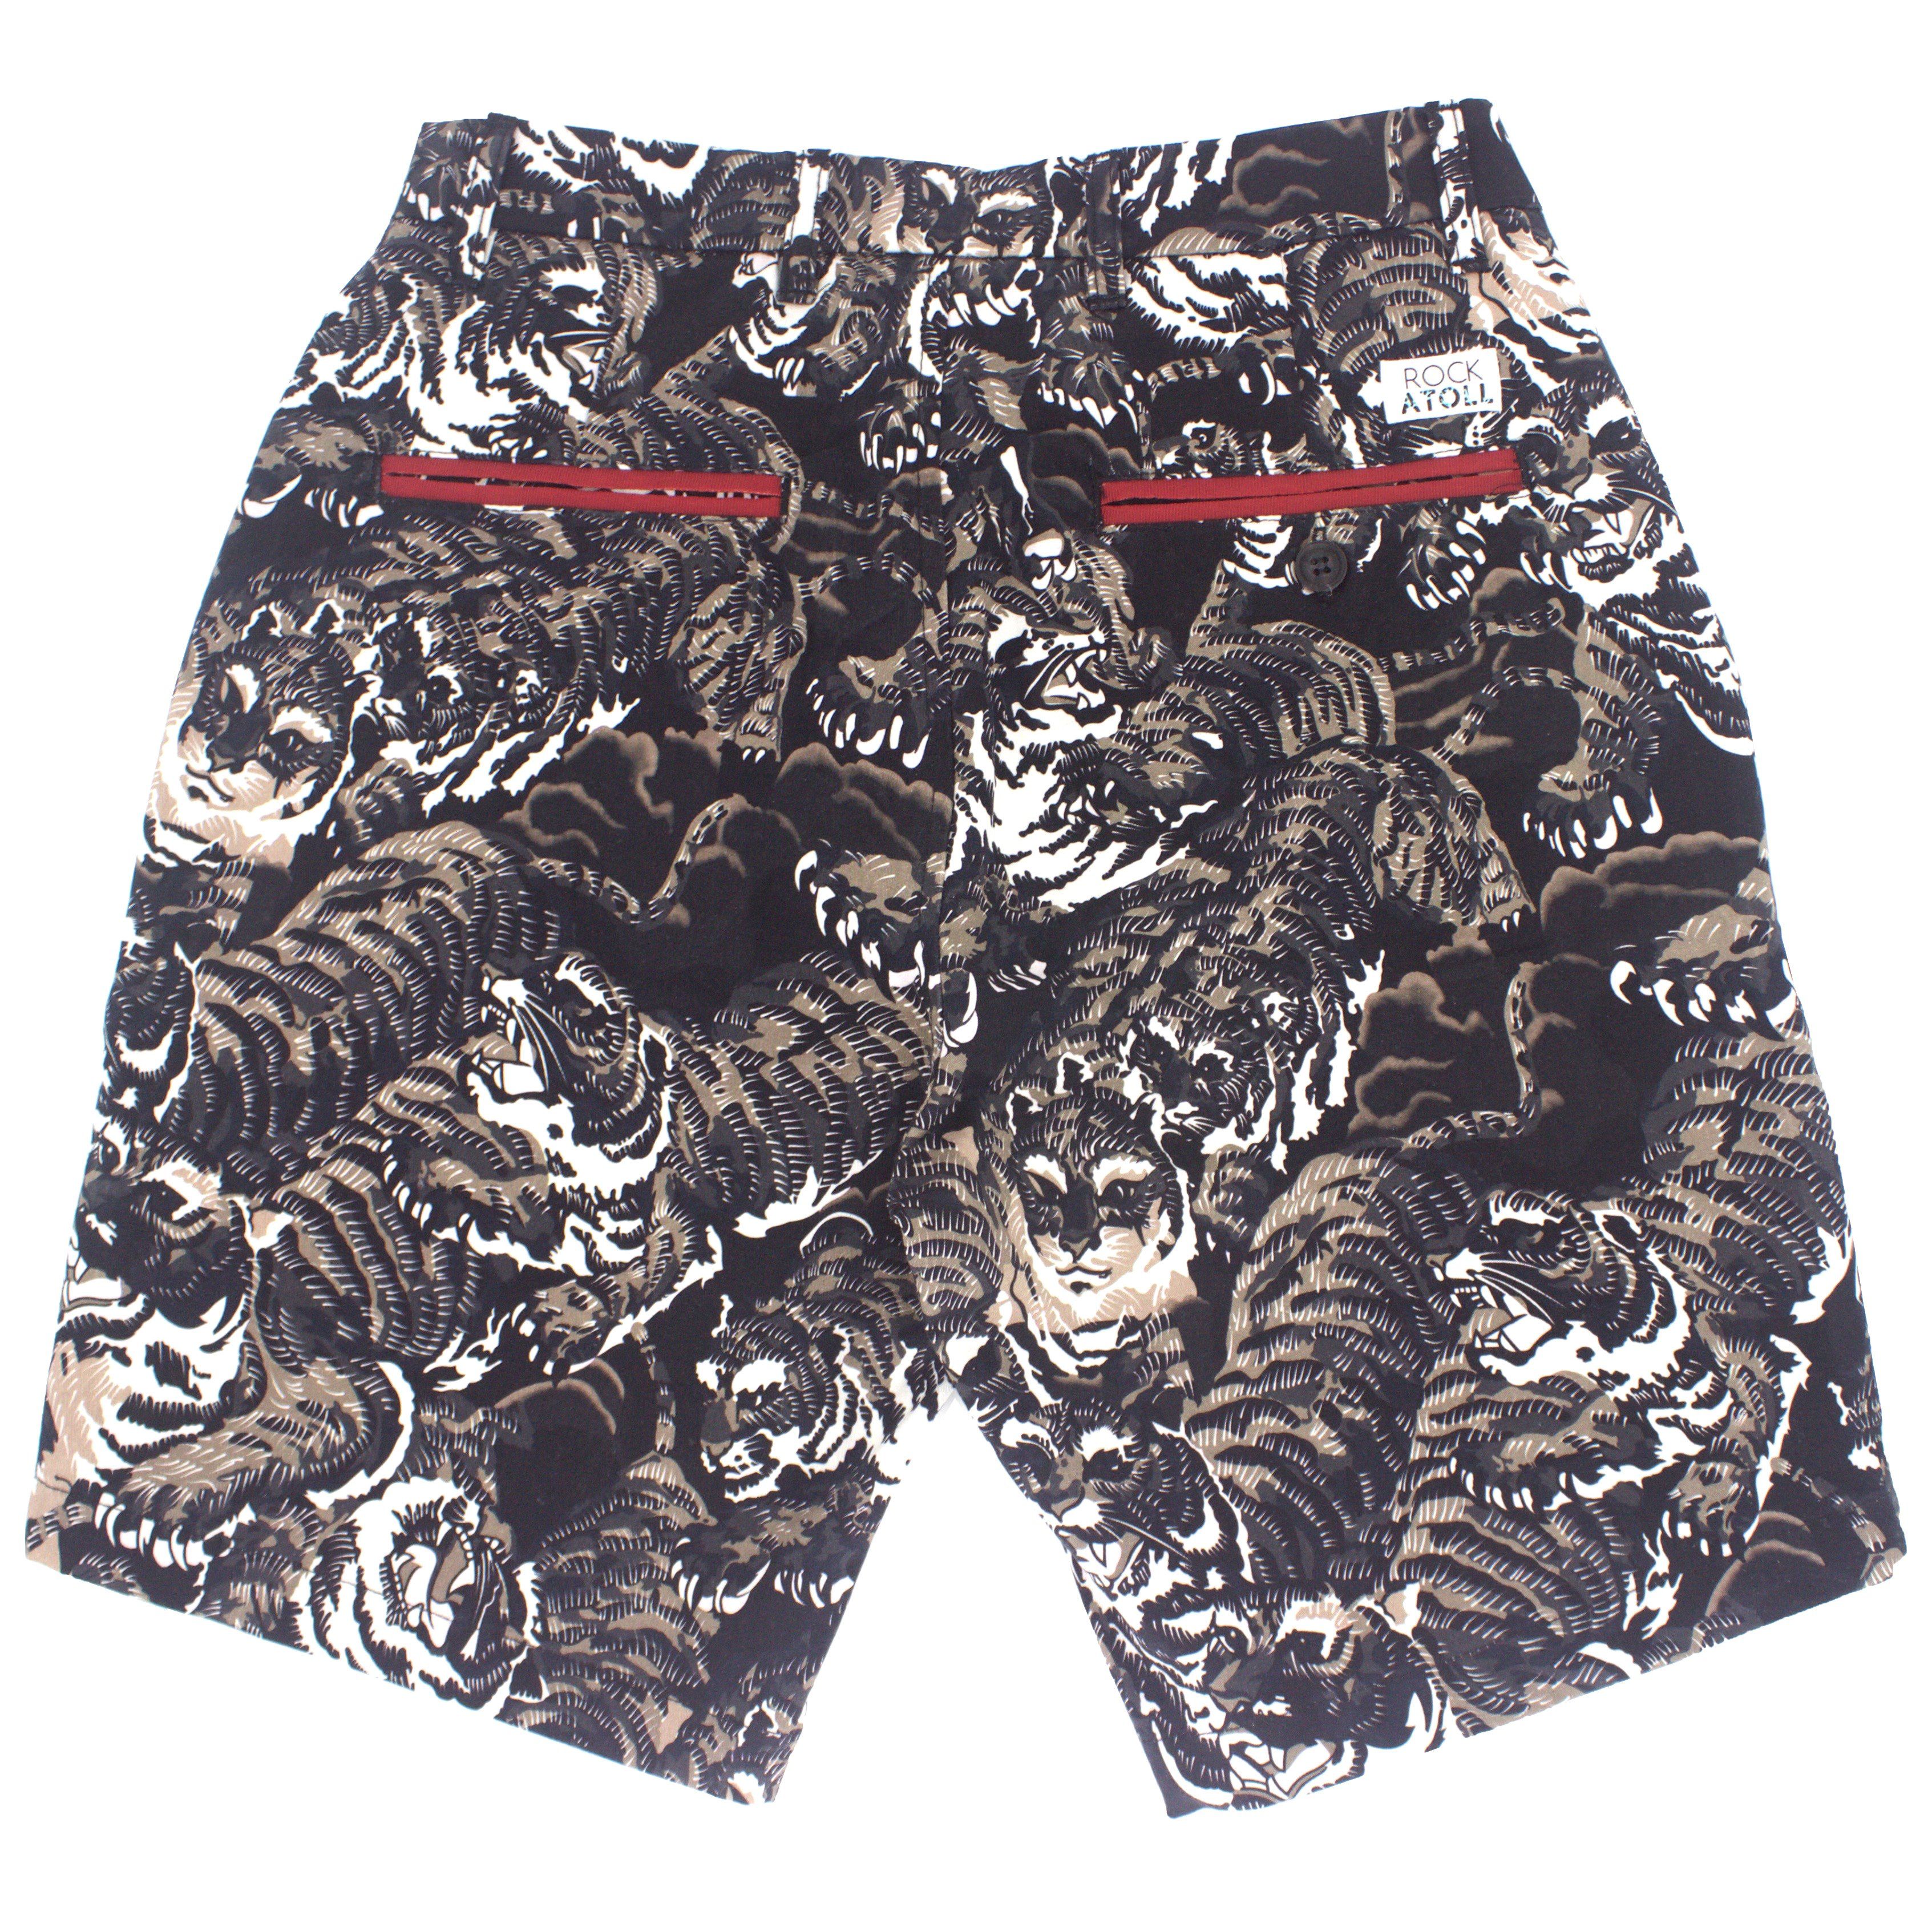 Crazy Tiger Collage Print Slim Fit Preppy Going Out Shorts for Men